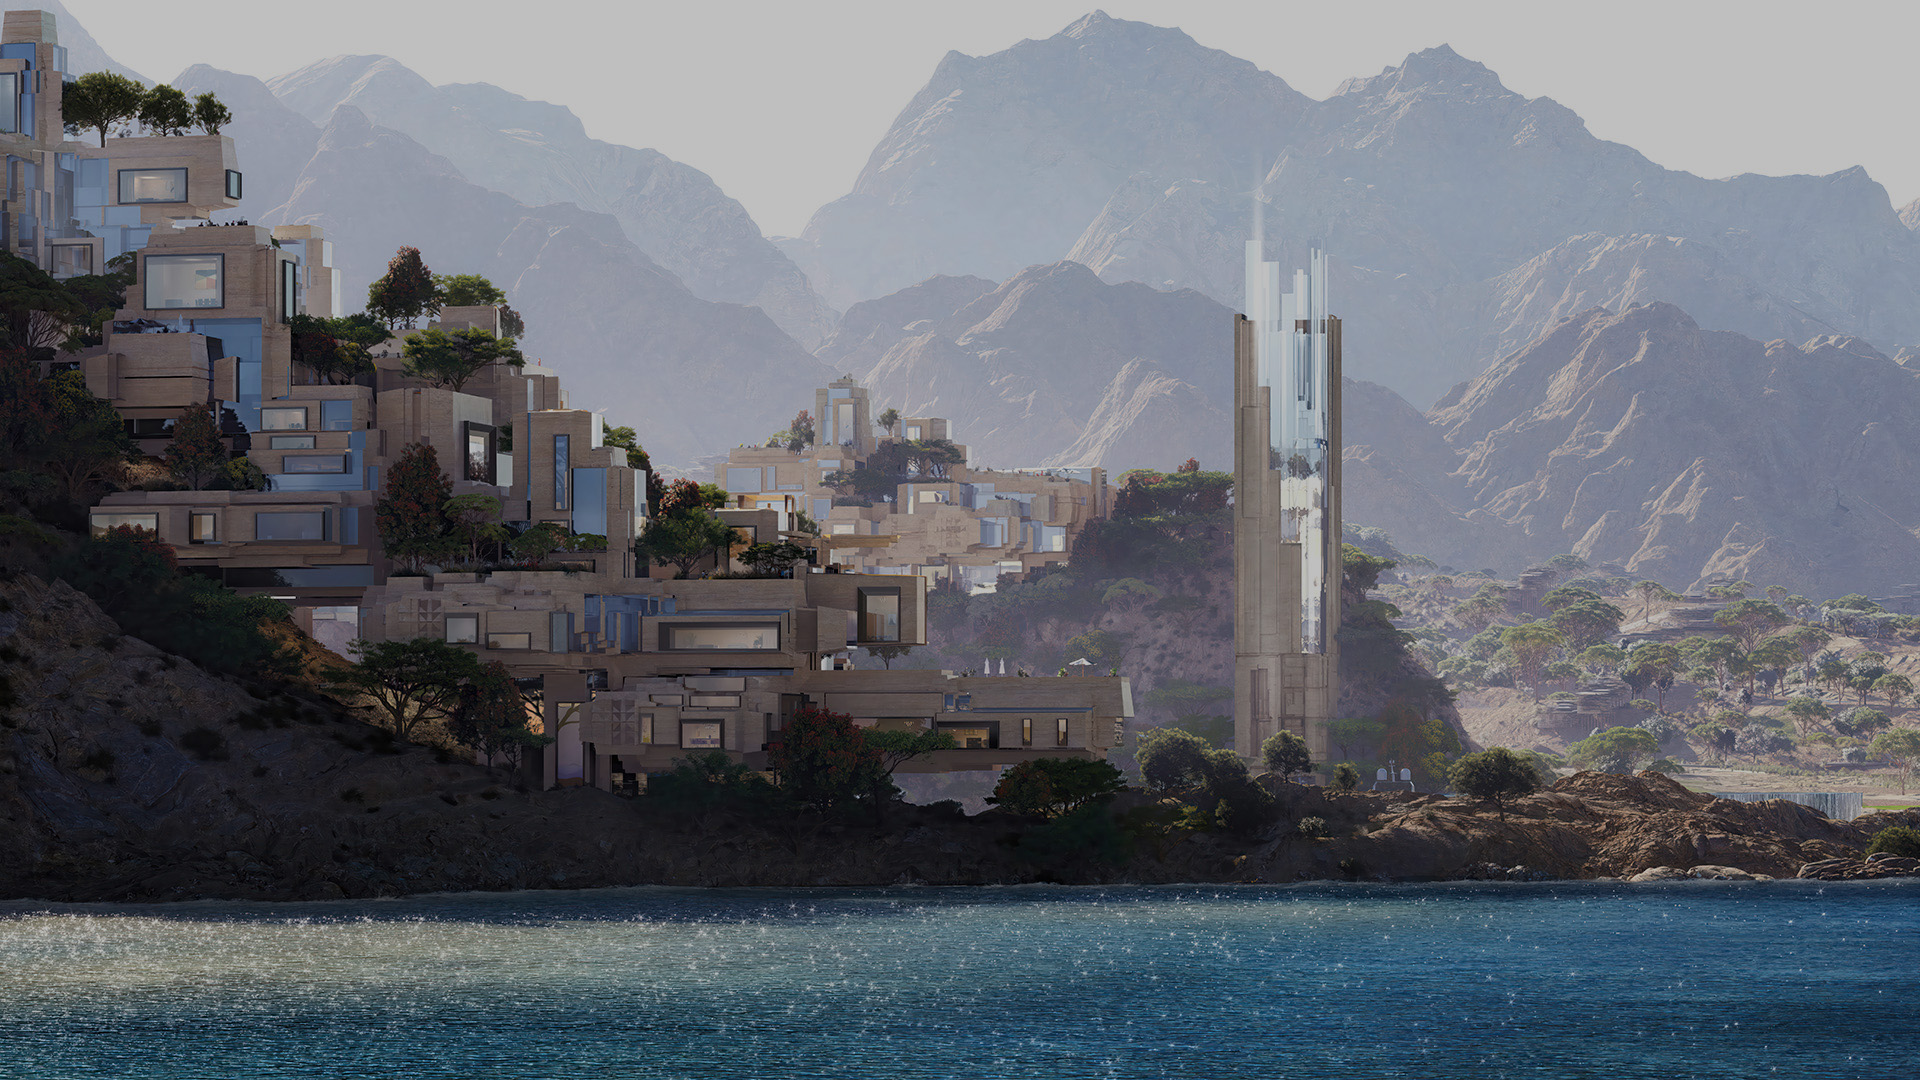 Background for the Norlana Community near the beach